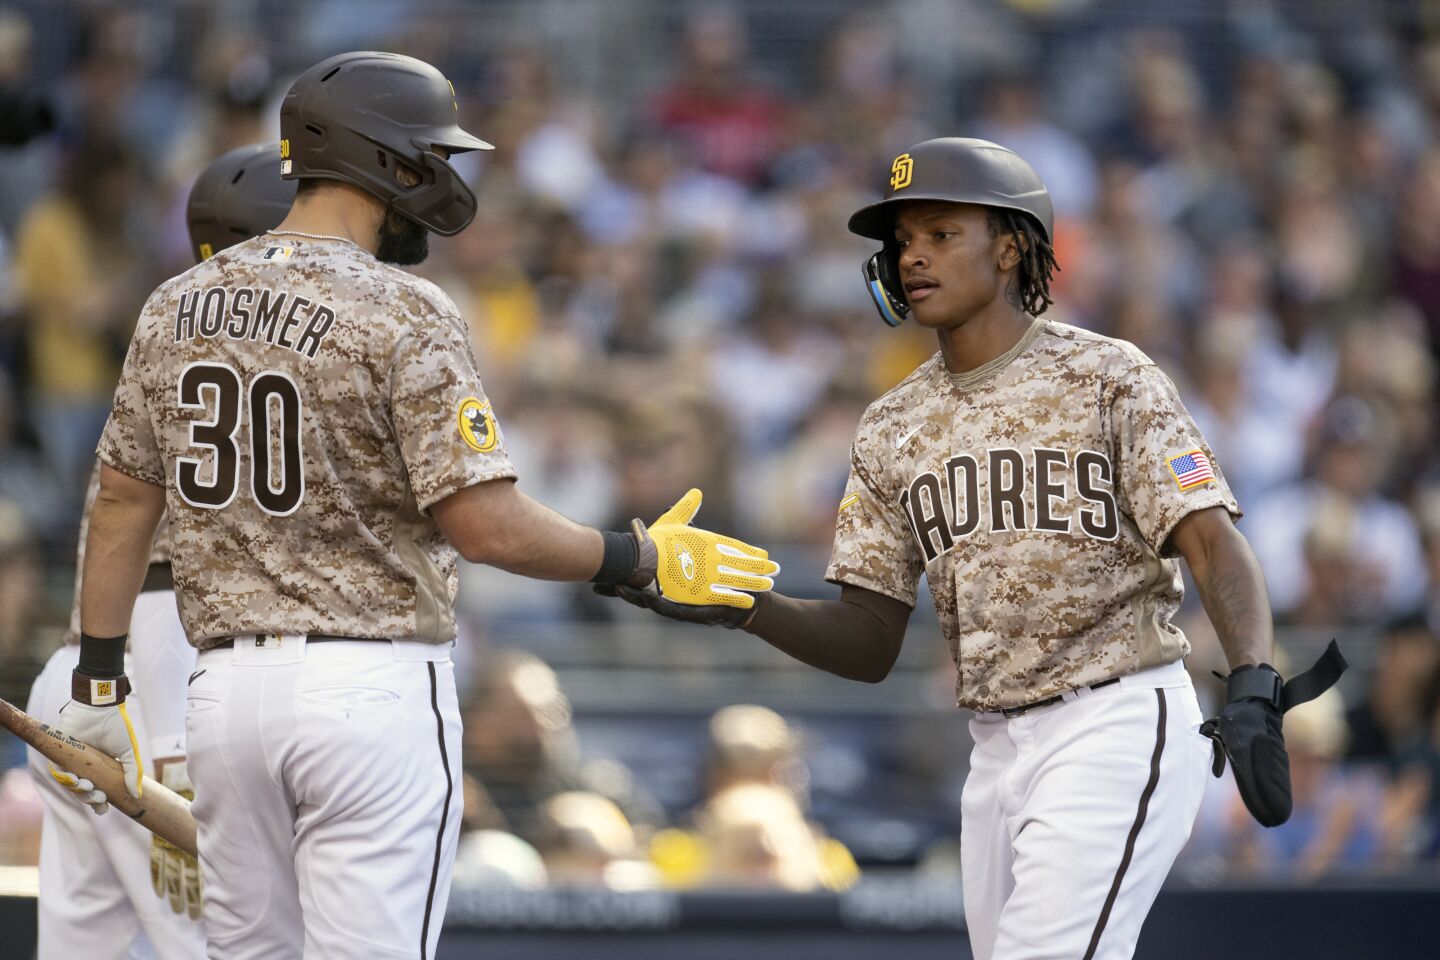 San Diego Padres (6-5, 4th in NL West)The Padres split a four-game series with the defending champion Atlanta Braves. They’ve set a new record with 11 straight games without an error to open the season, lead the majors with six quality starts and are fifth with a .209 opponent average. The offense, though, ranks 23rd in batting average with runners in scoring position (.216).